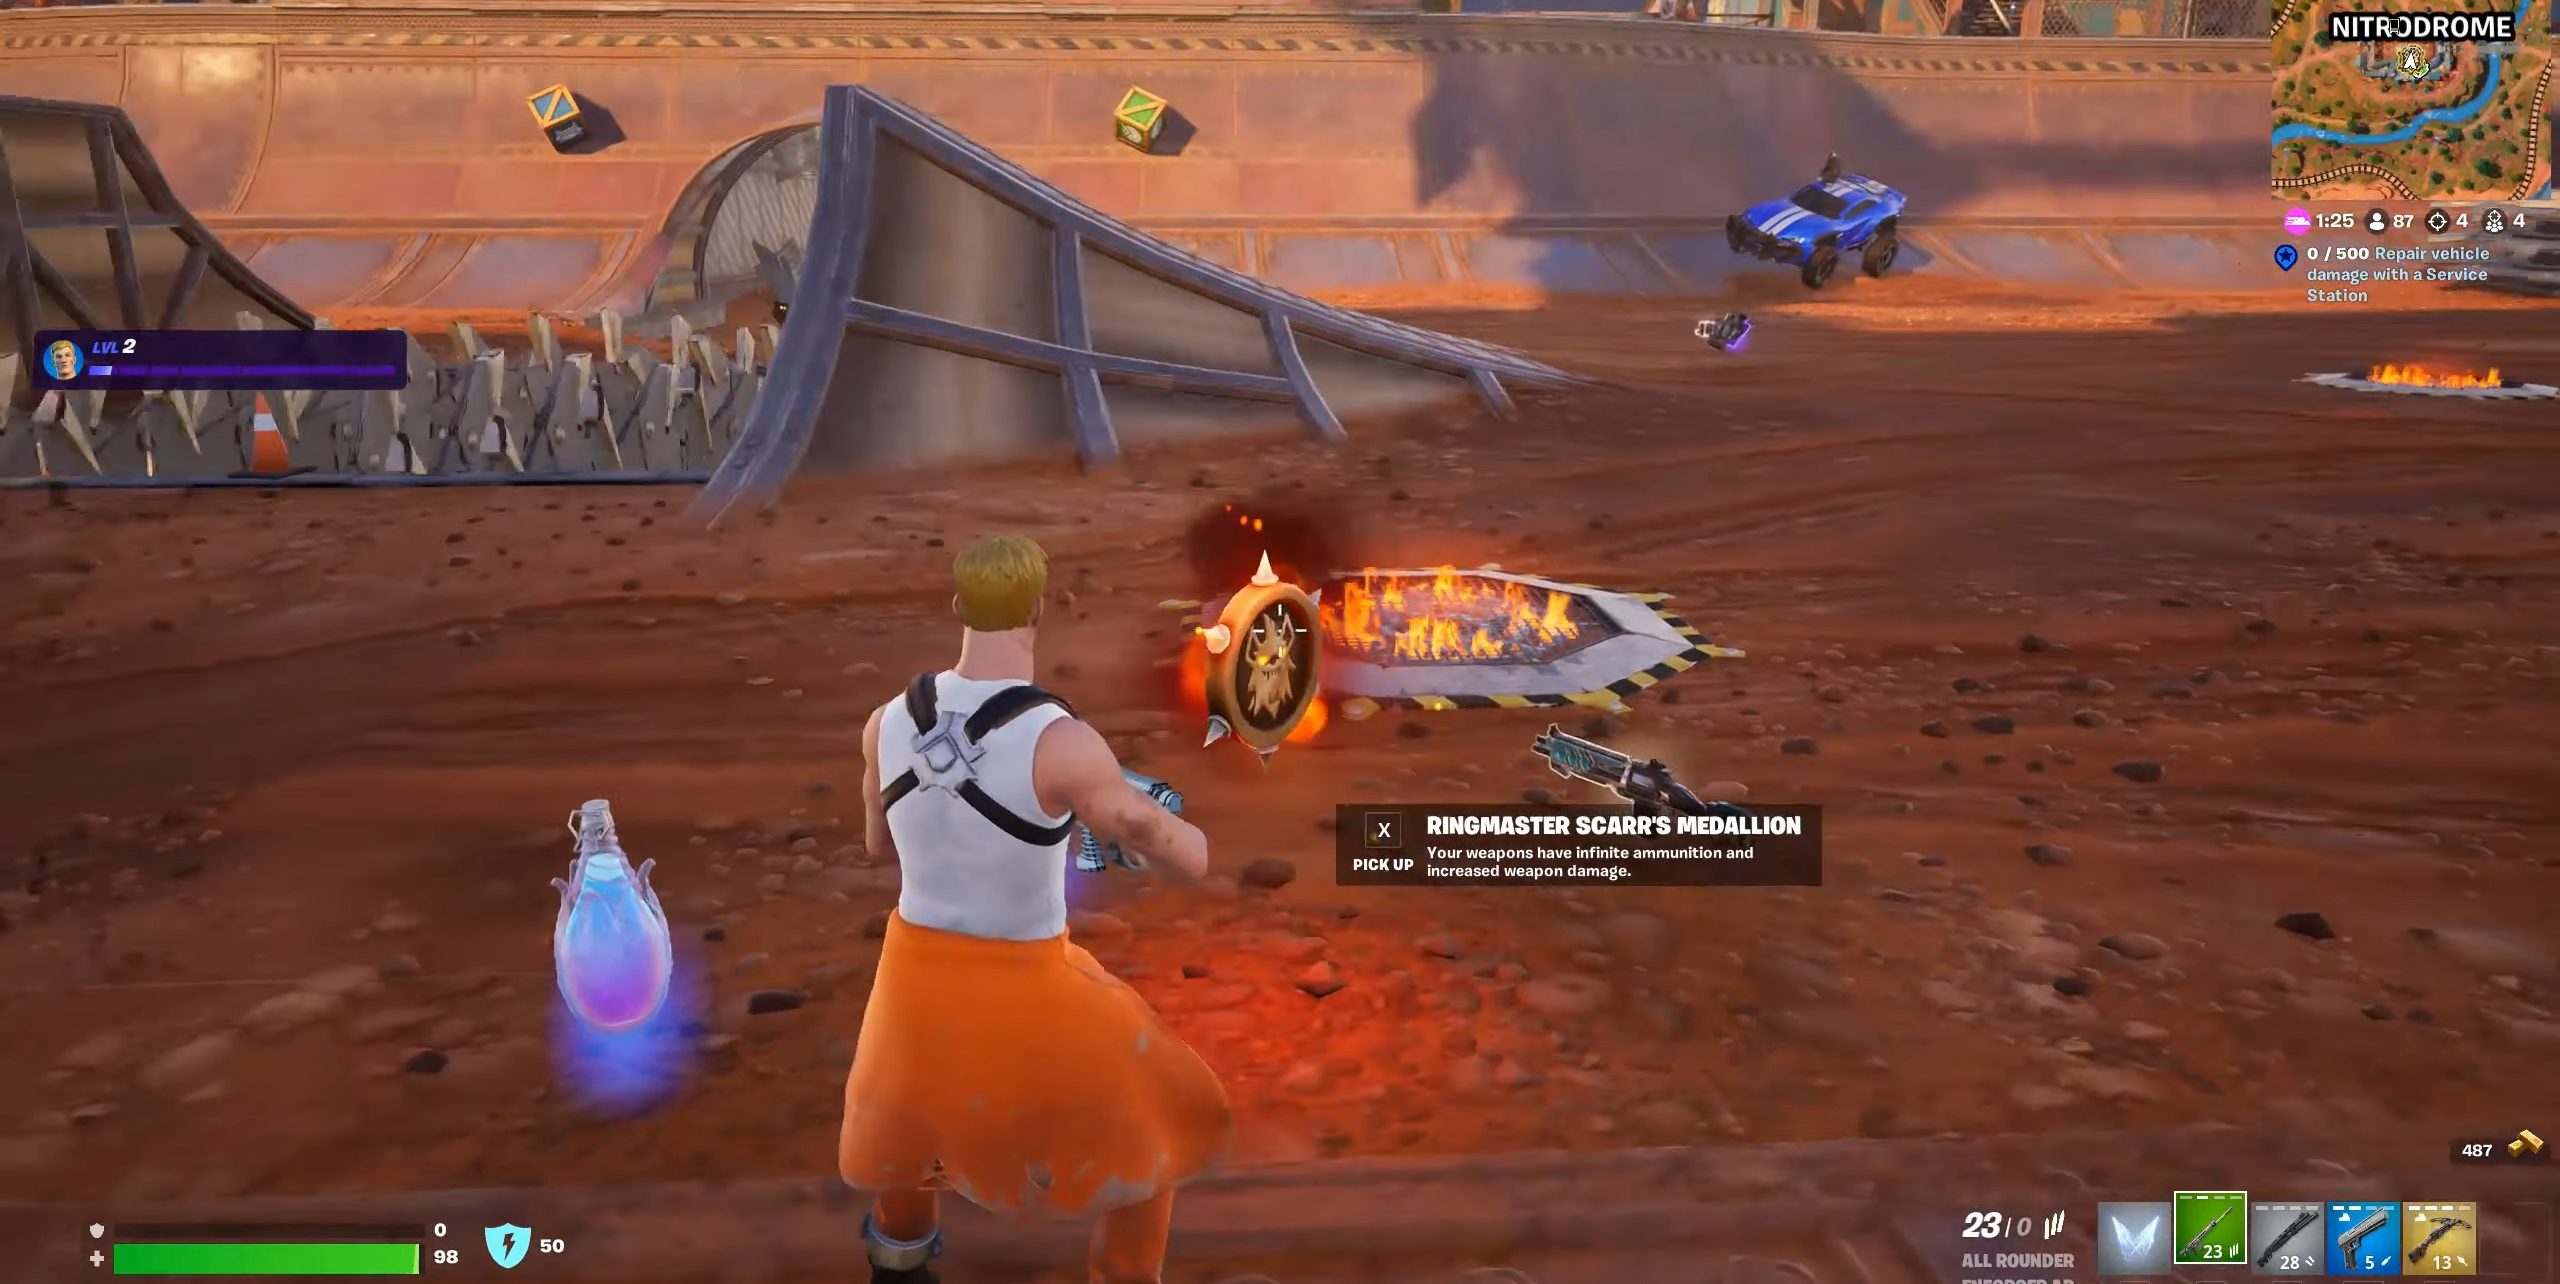 A player near a medallion in Fortnite.